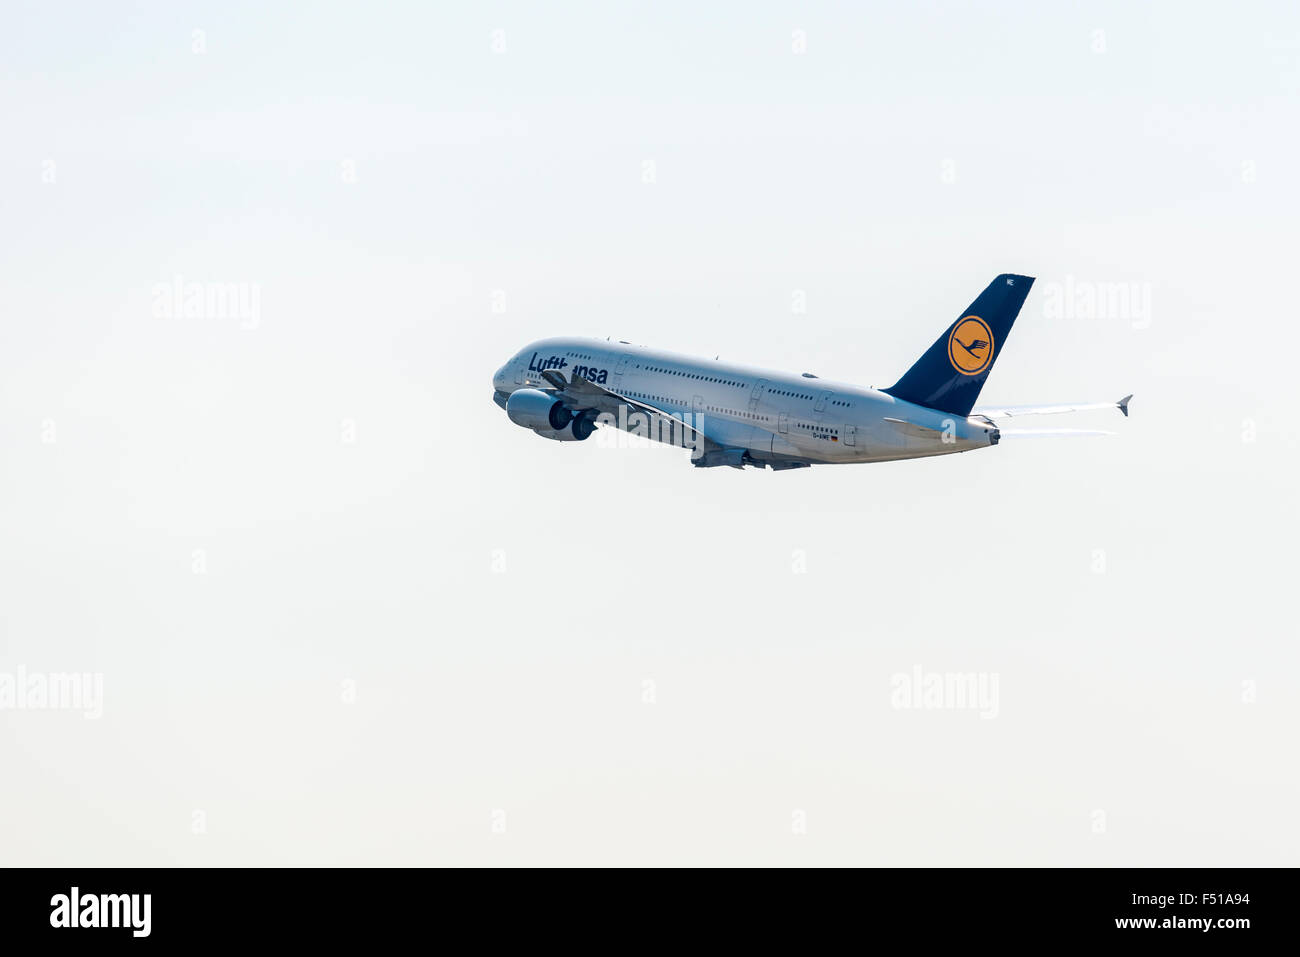 The Airbus A340-800 Muenchen of the airline Lufthansa is taking off at Frankfurt International Airport Stock Photo